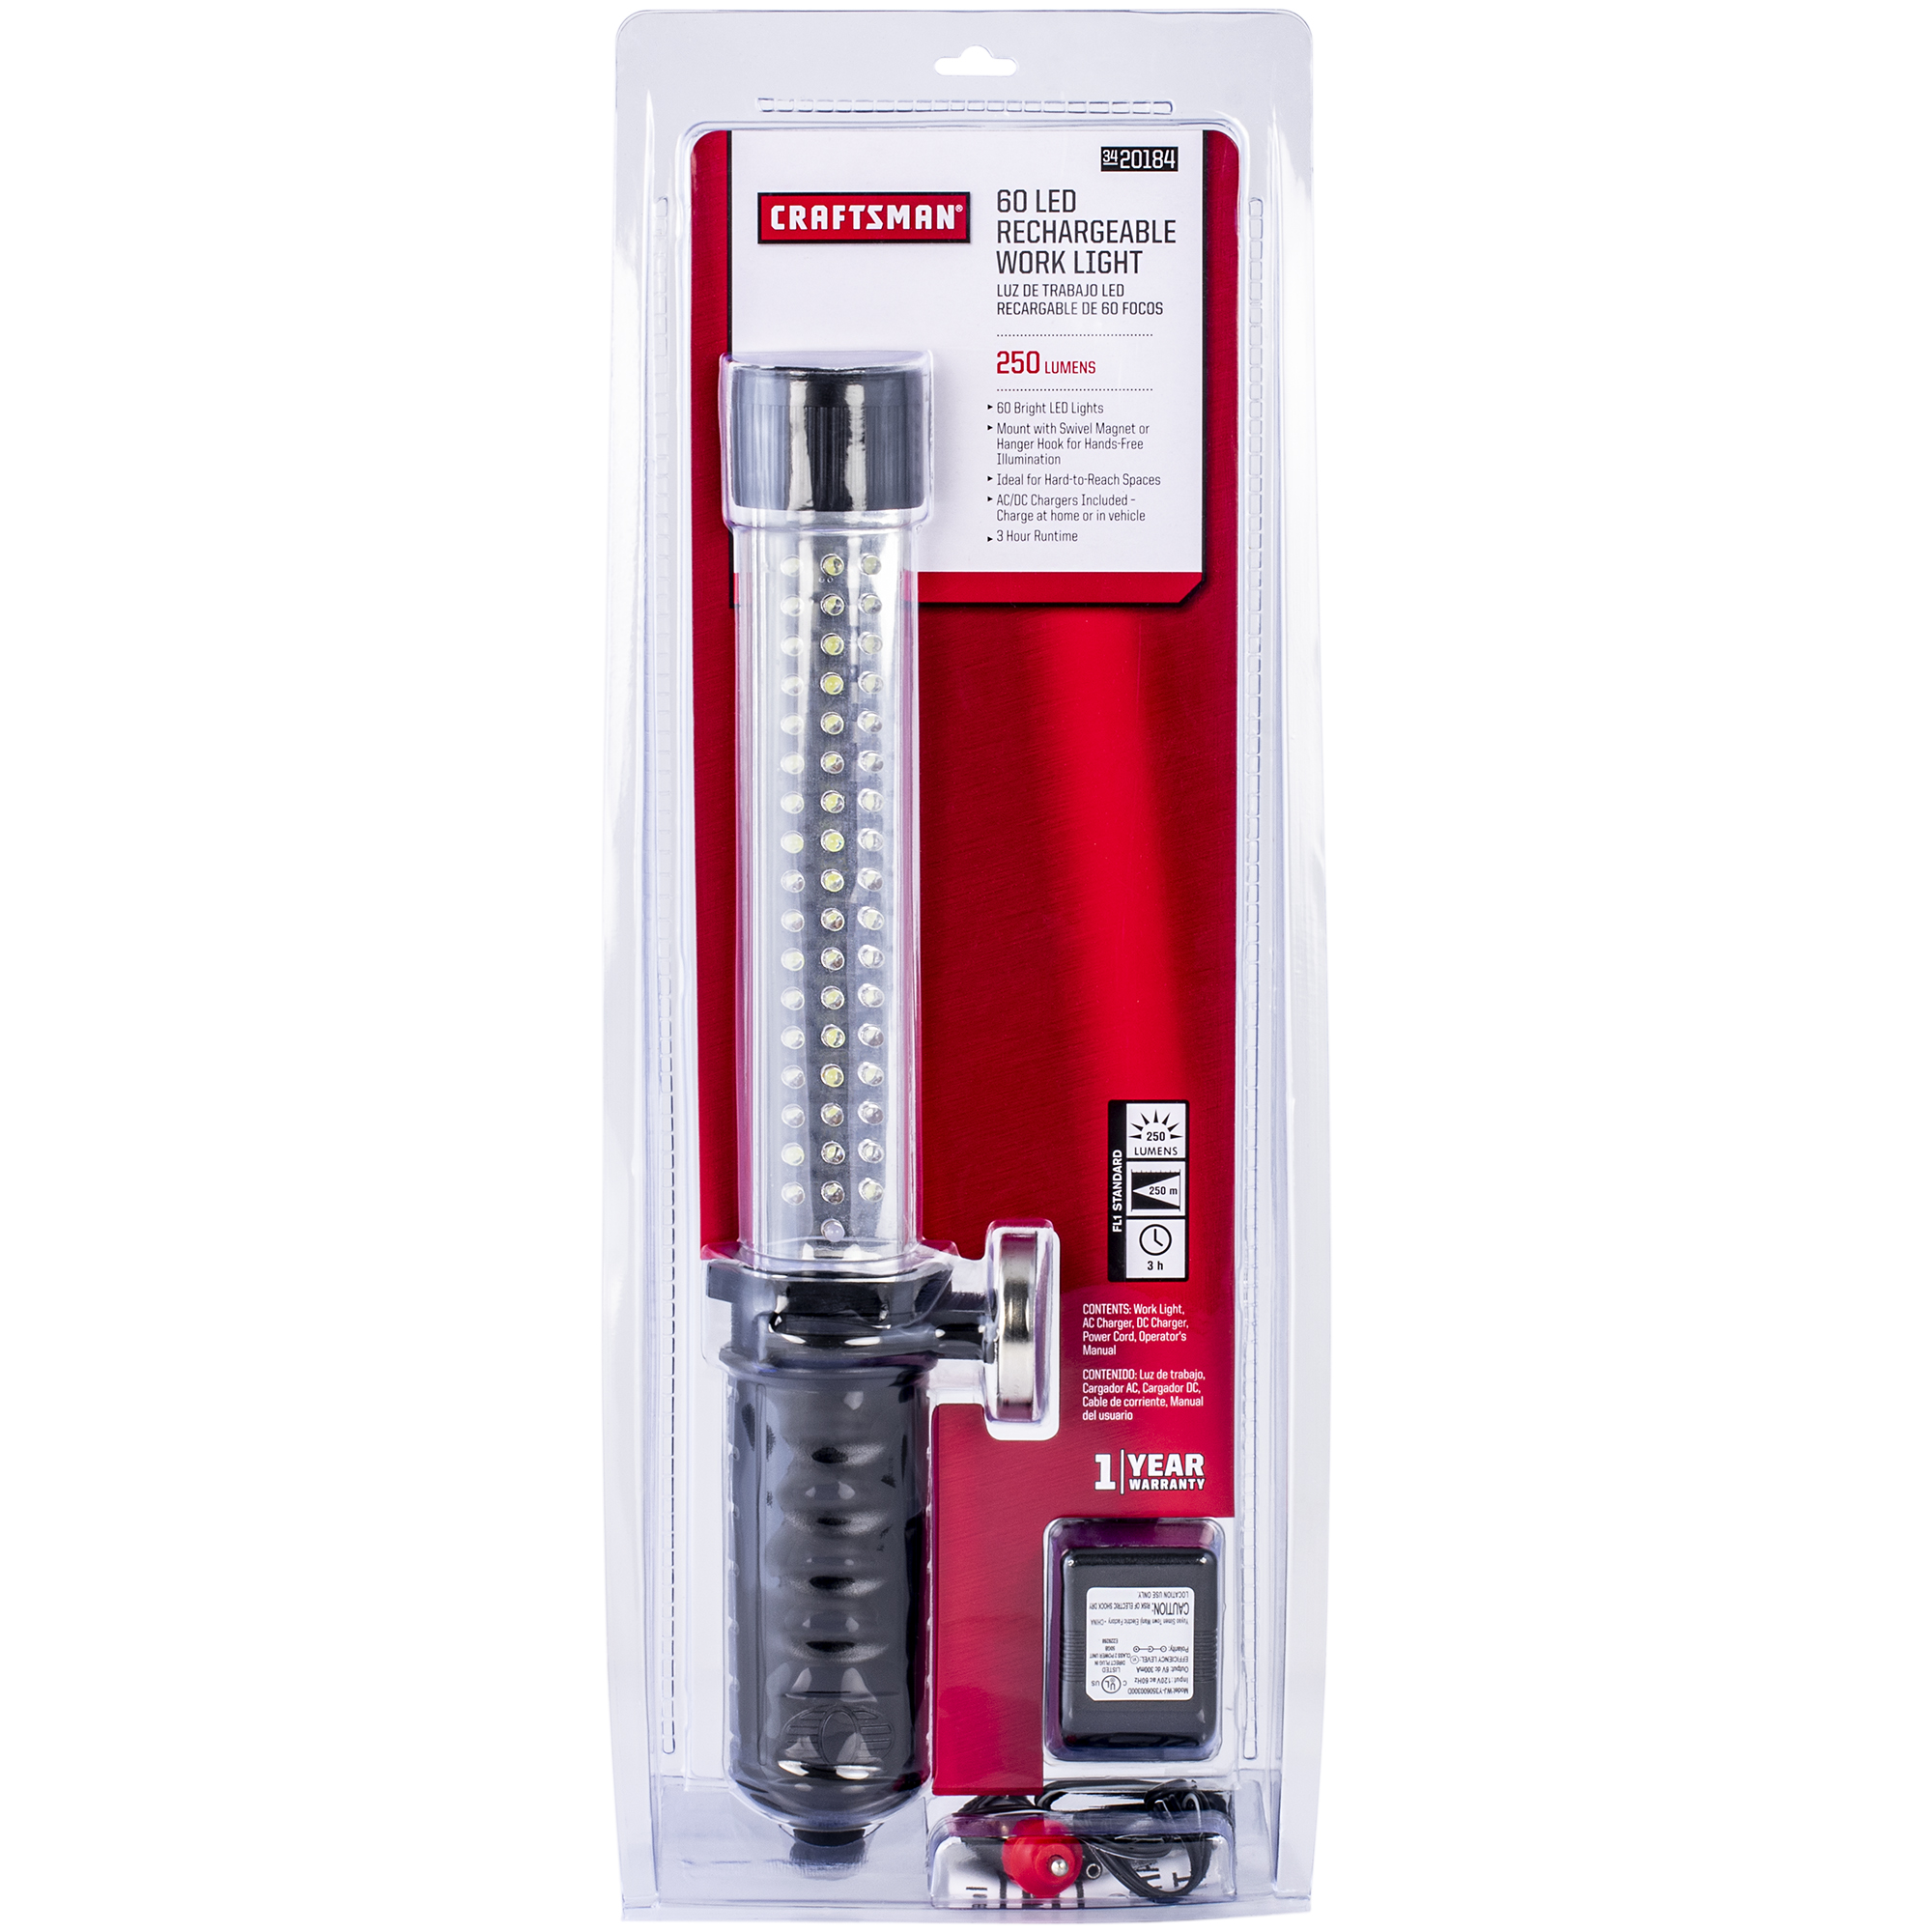 Craftsman 60 LED Rechargeable Work Light